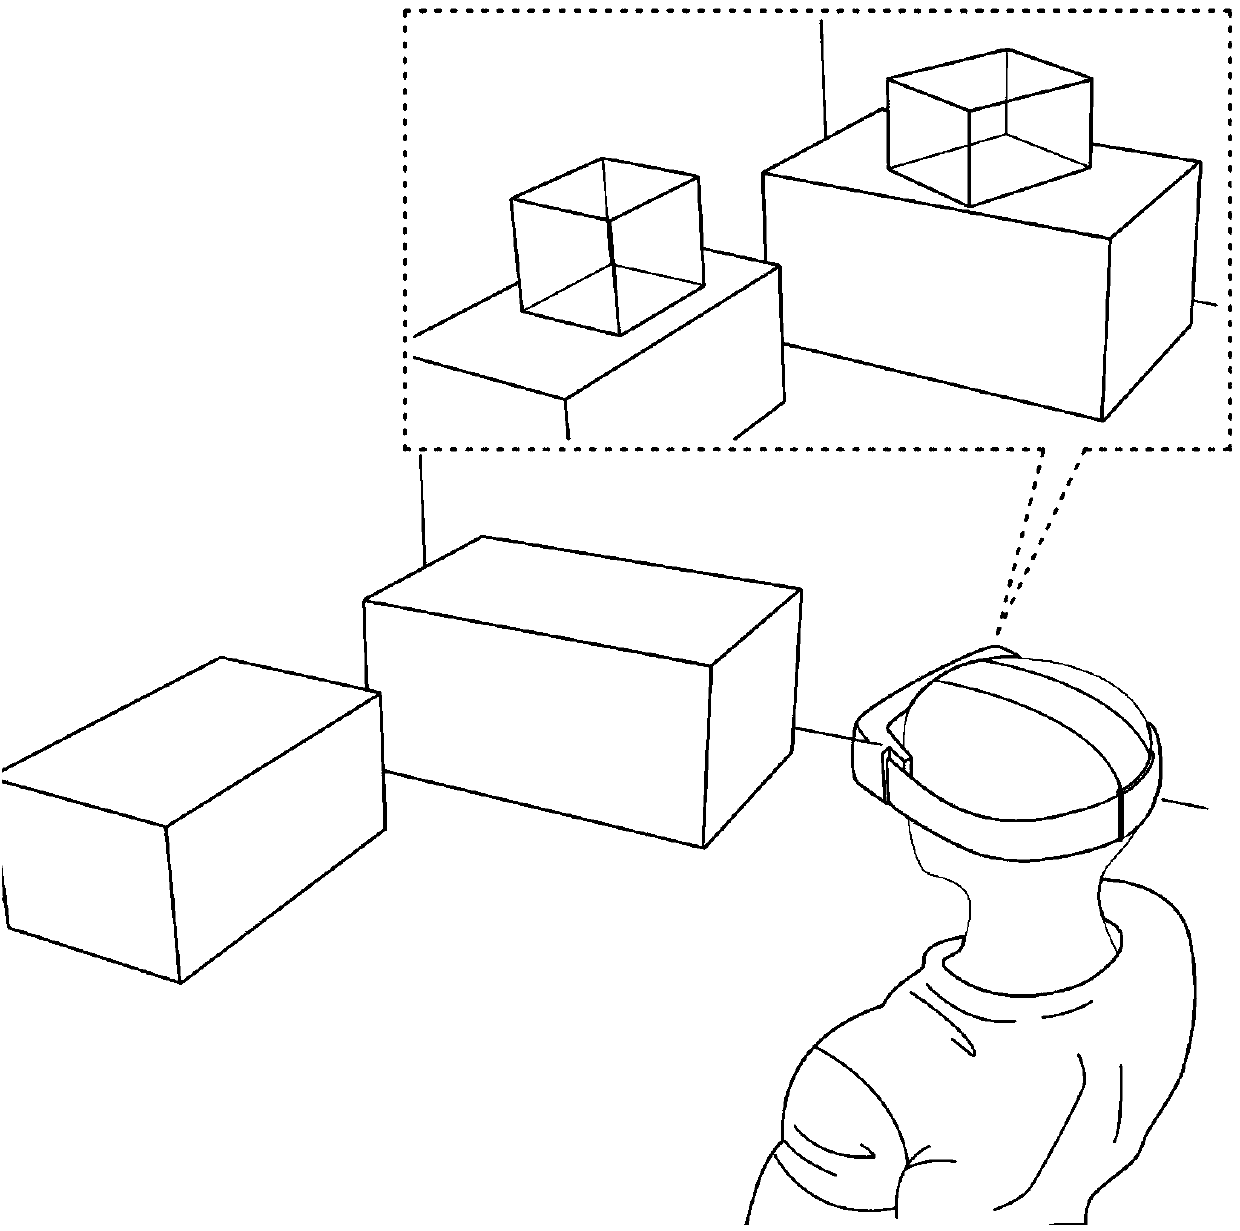 Real scene mapping system and method in virtual reality